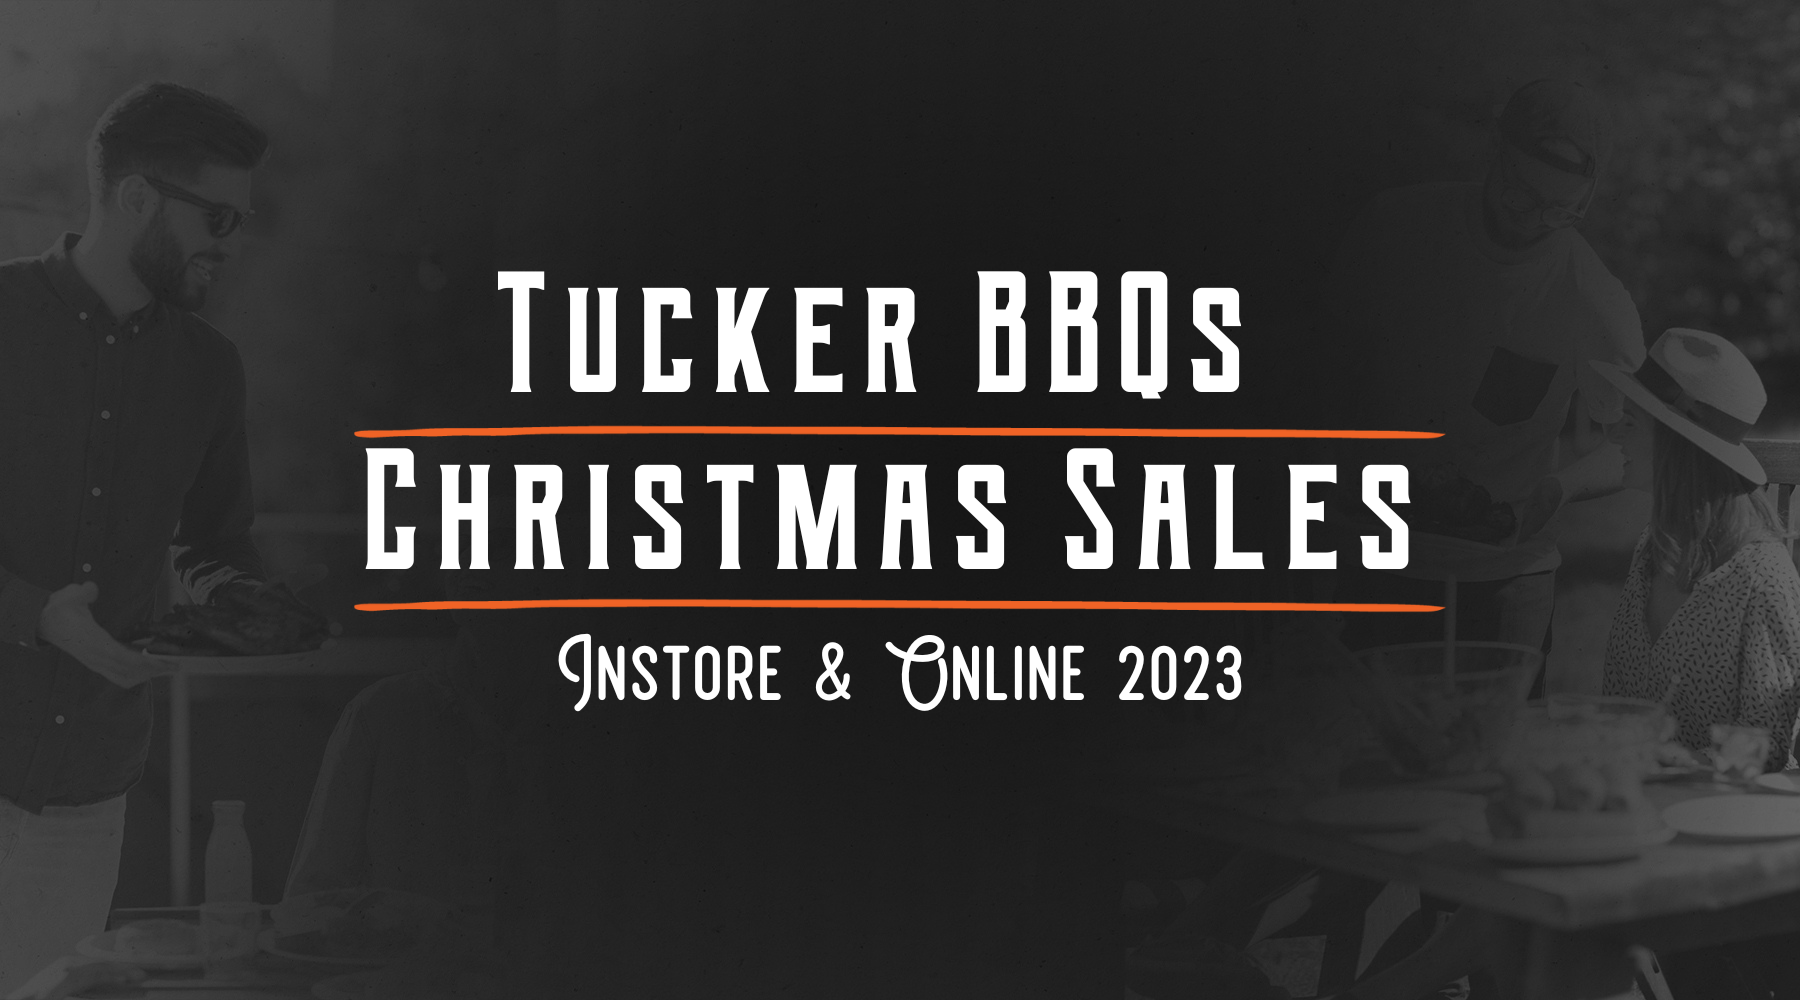 Tucker BBQs: Your One-Stop Shop for Christmas BBQ Delights